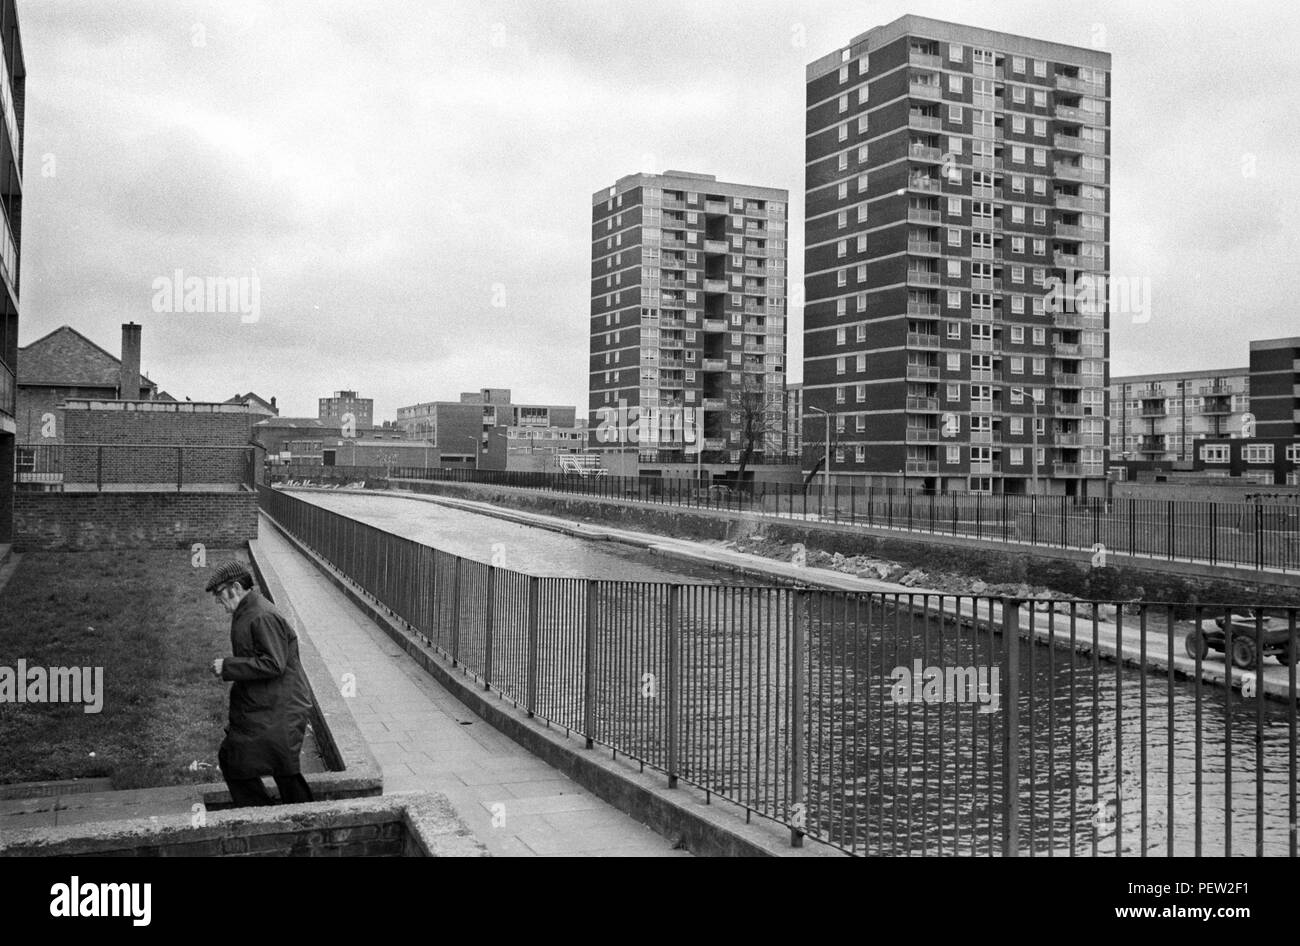 Council estate housing 1970s UK. Regents Canal looking across to the De Beauvoir Estate, Haggerston east London. New build tower blocks. 1978 HOMER SYKES Stock Photo